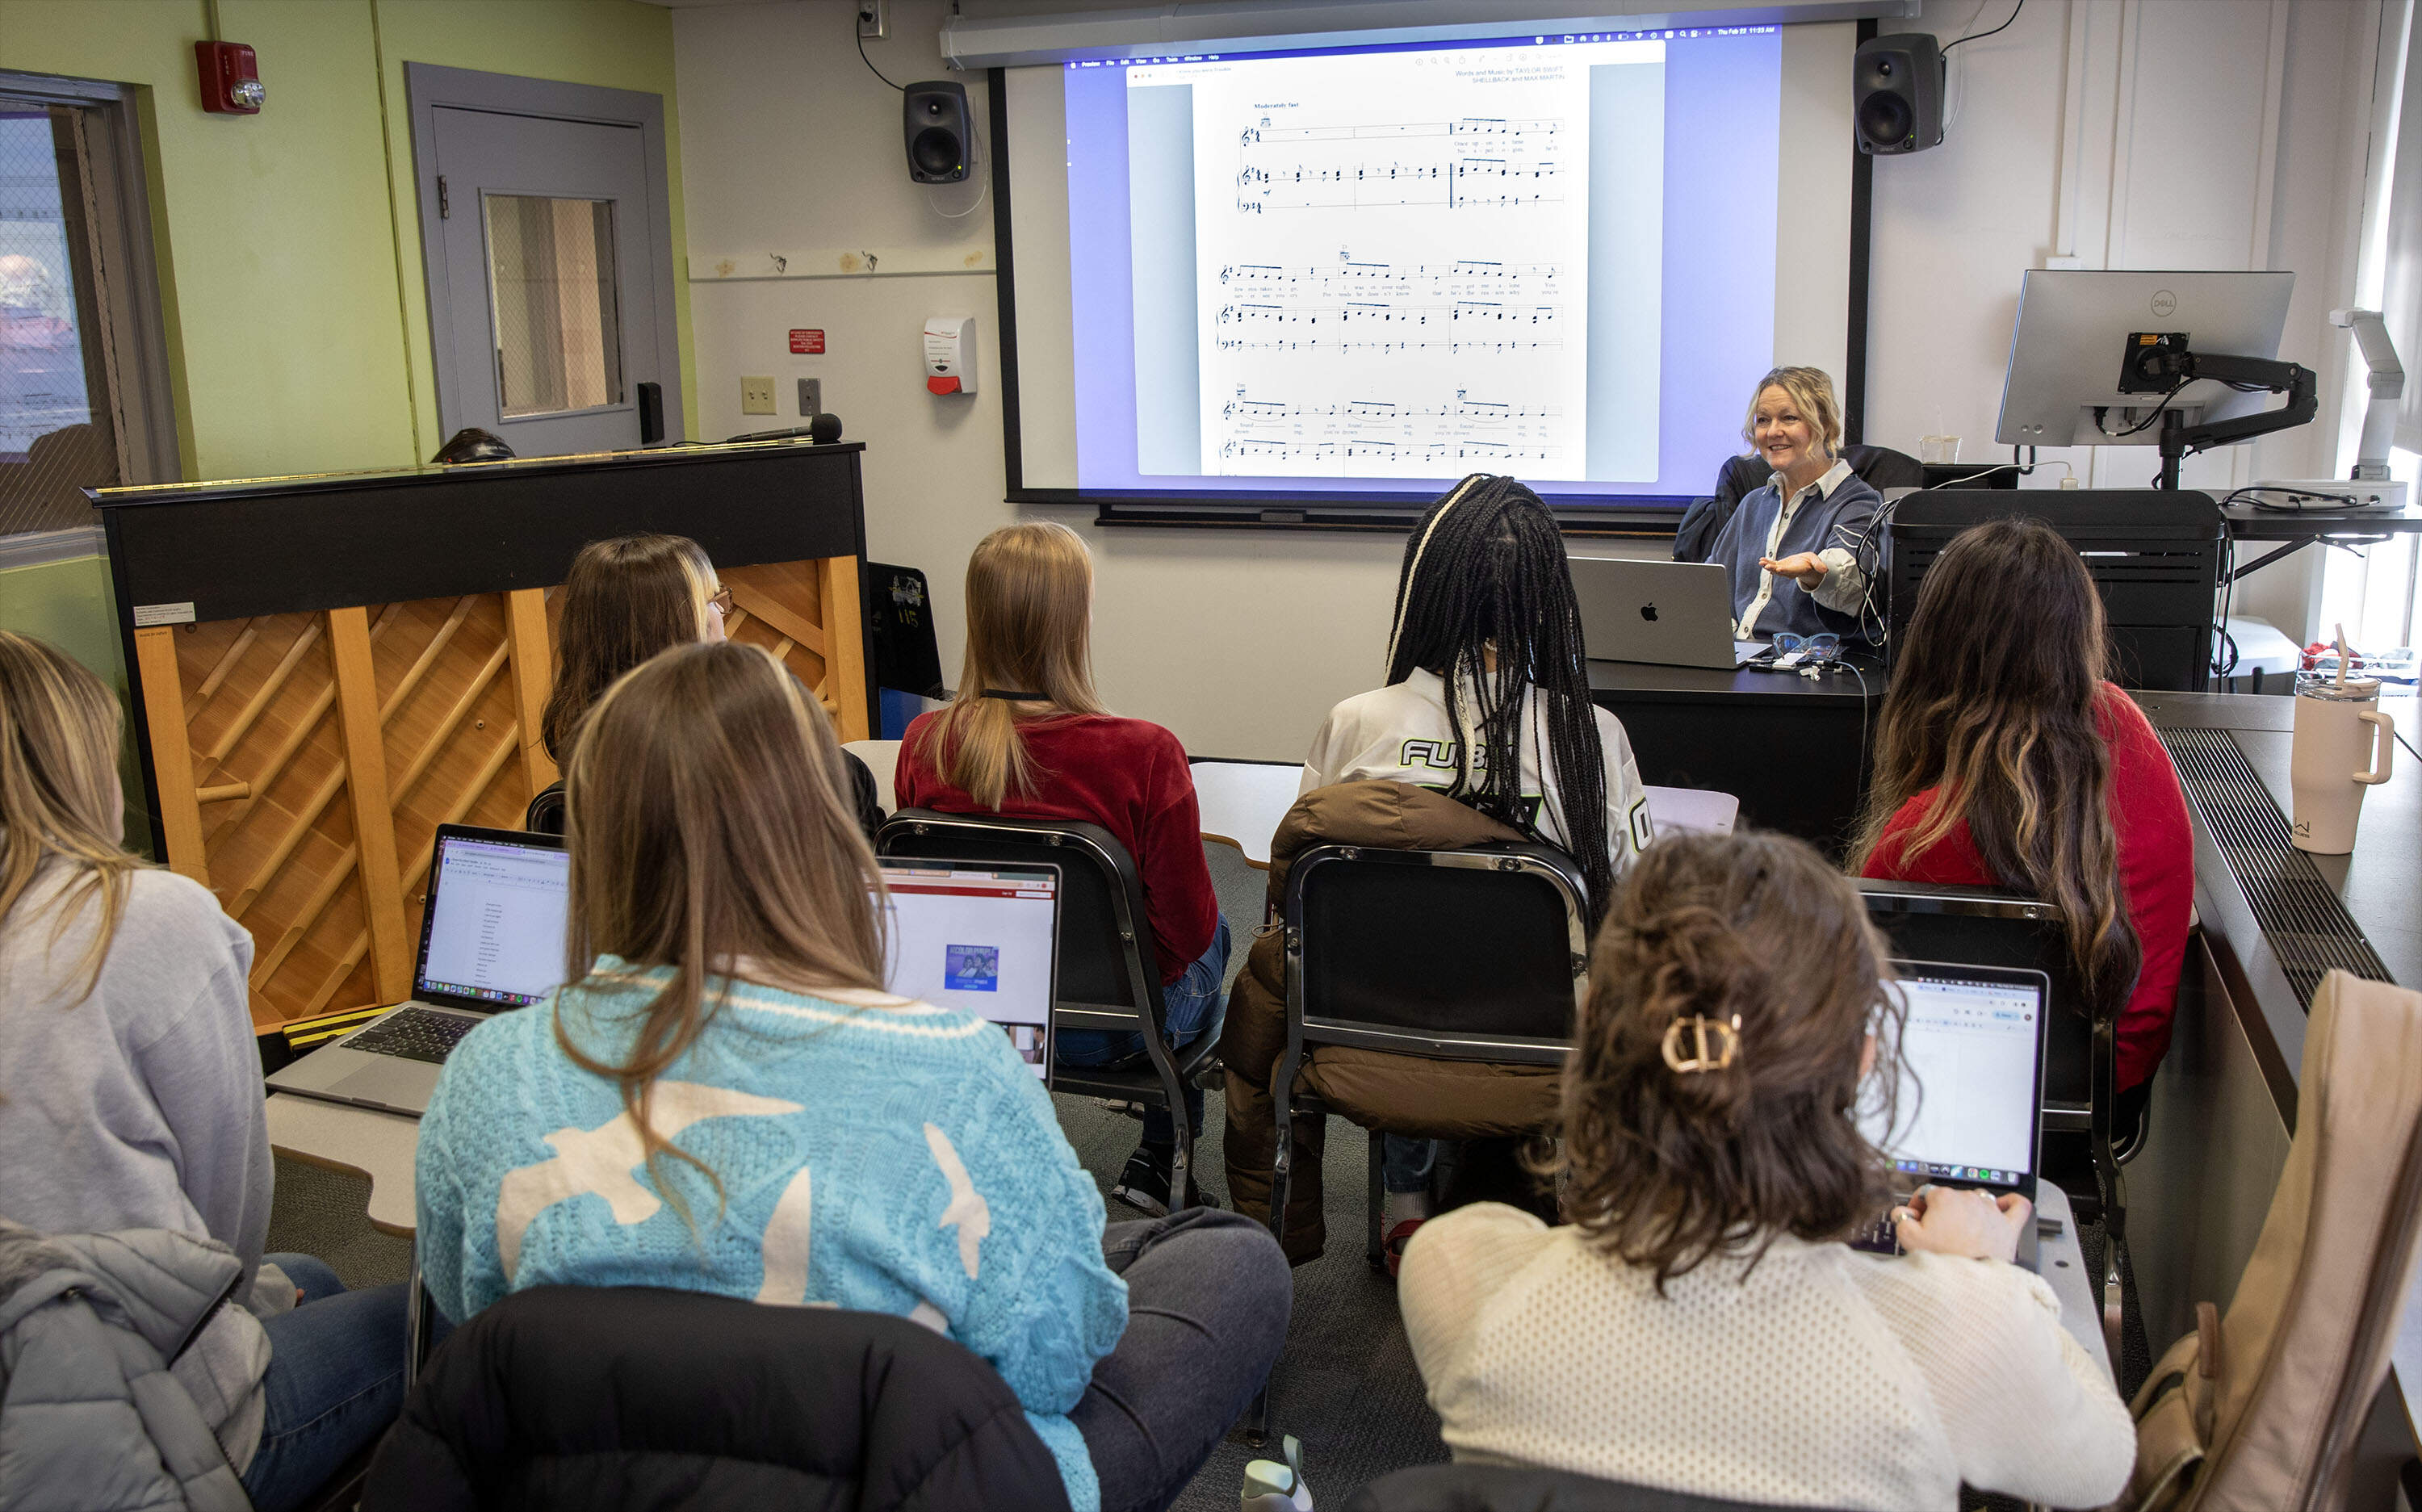 Songwriting professor Scarlet Keys talks with her students during her Taylor Swift class at Berklee College of Music. (Robin Lubbock/WBUR)